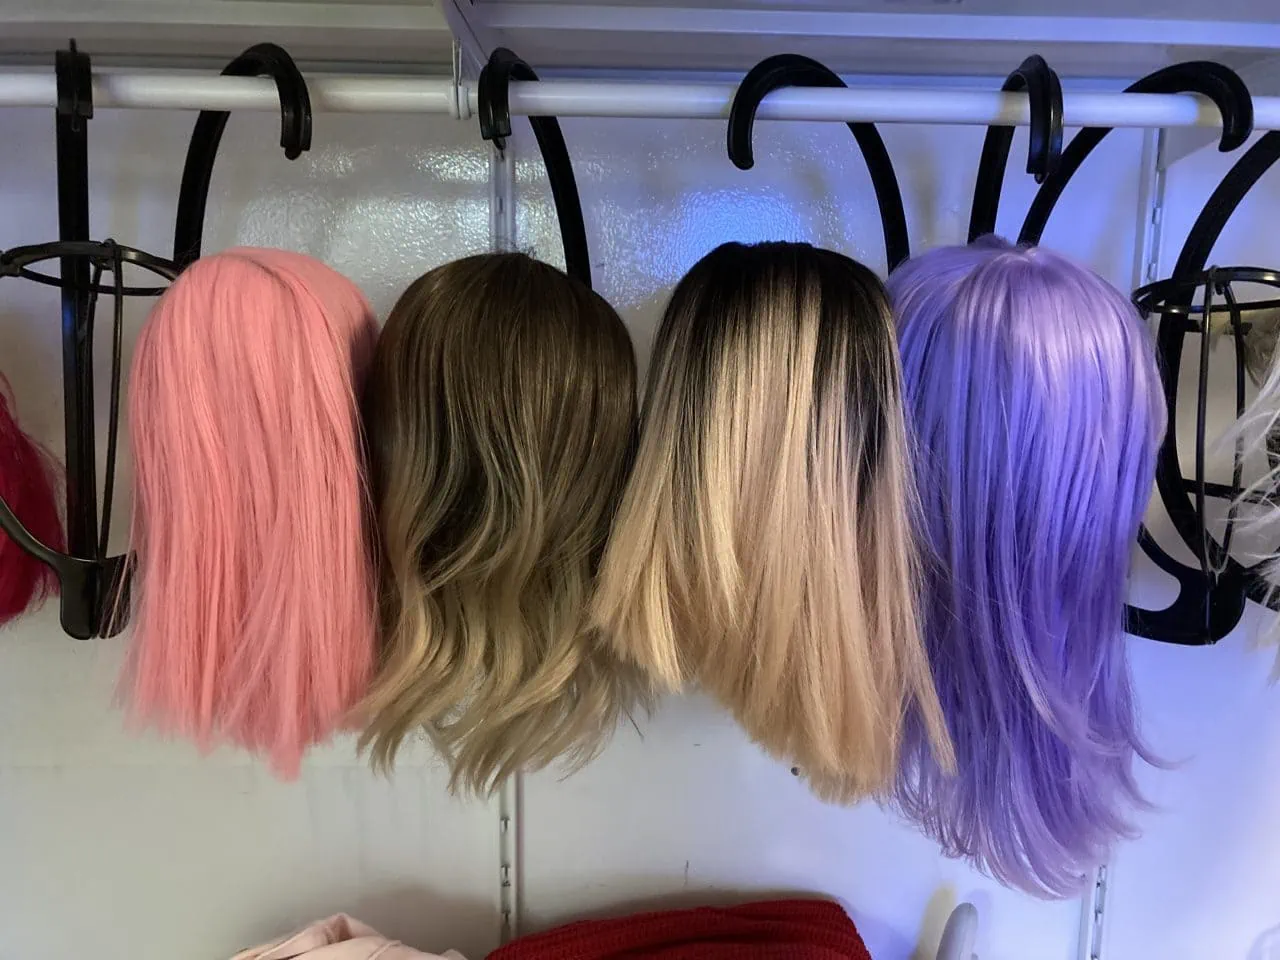 Colorful wigs on a rack at the Barbie Cyberbrothel.